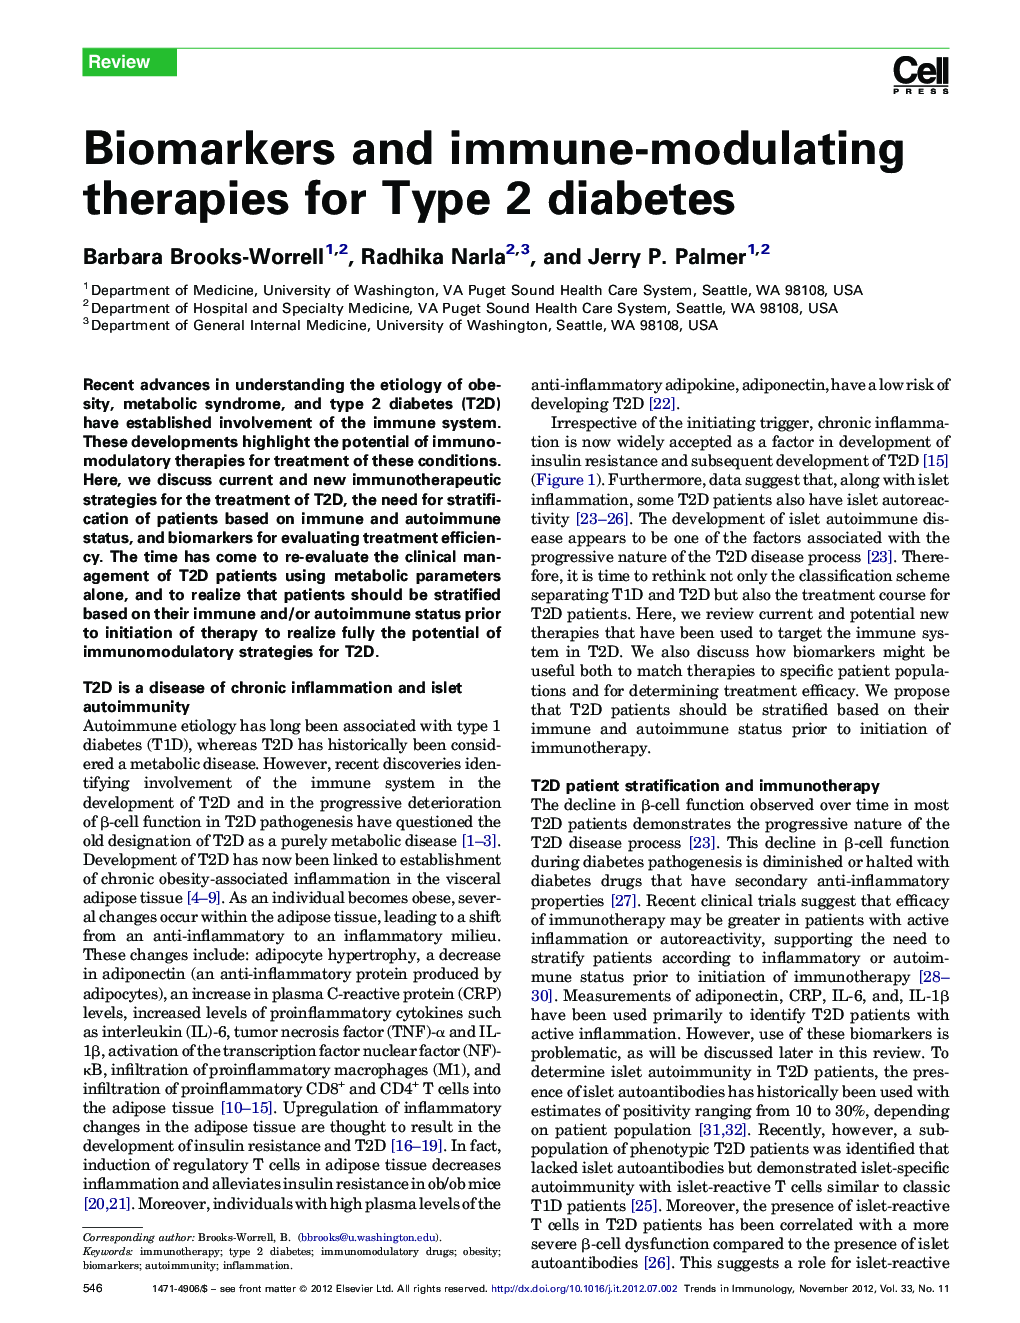 Biomarkers and immune-modulating therapies for Type 2 diabetes